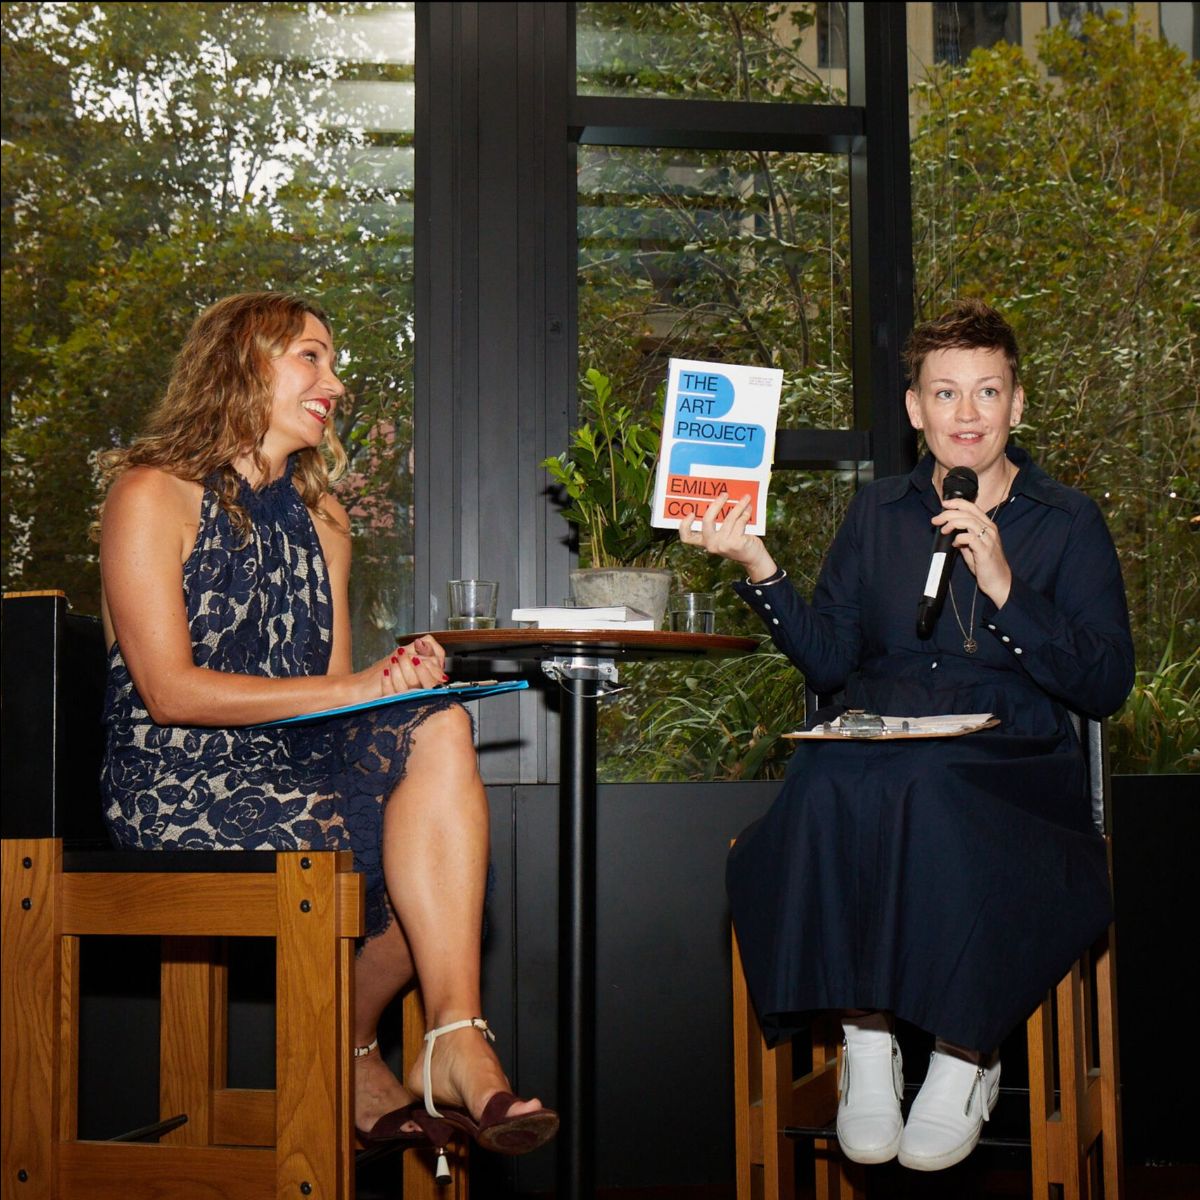 The Art Project Book Launch<br>
Emilya Colliver and Barbara Moore<br>
The Ace Hotel, Sydney